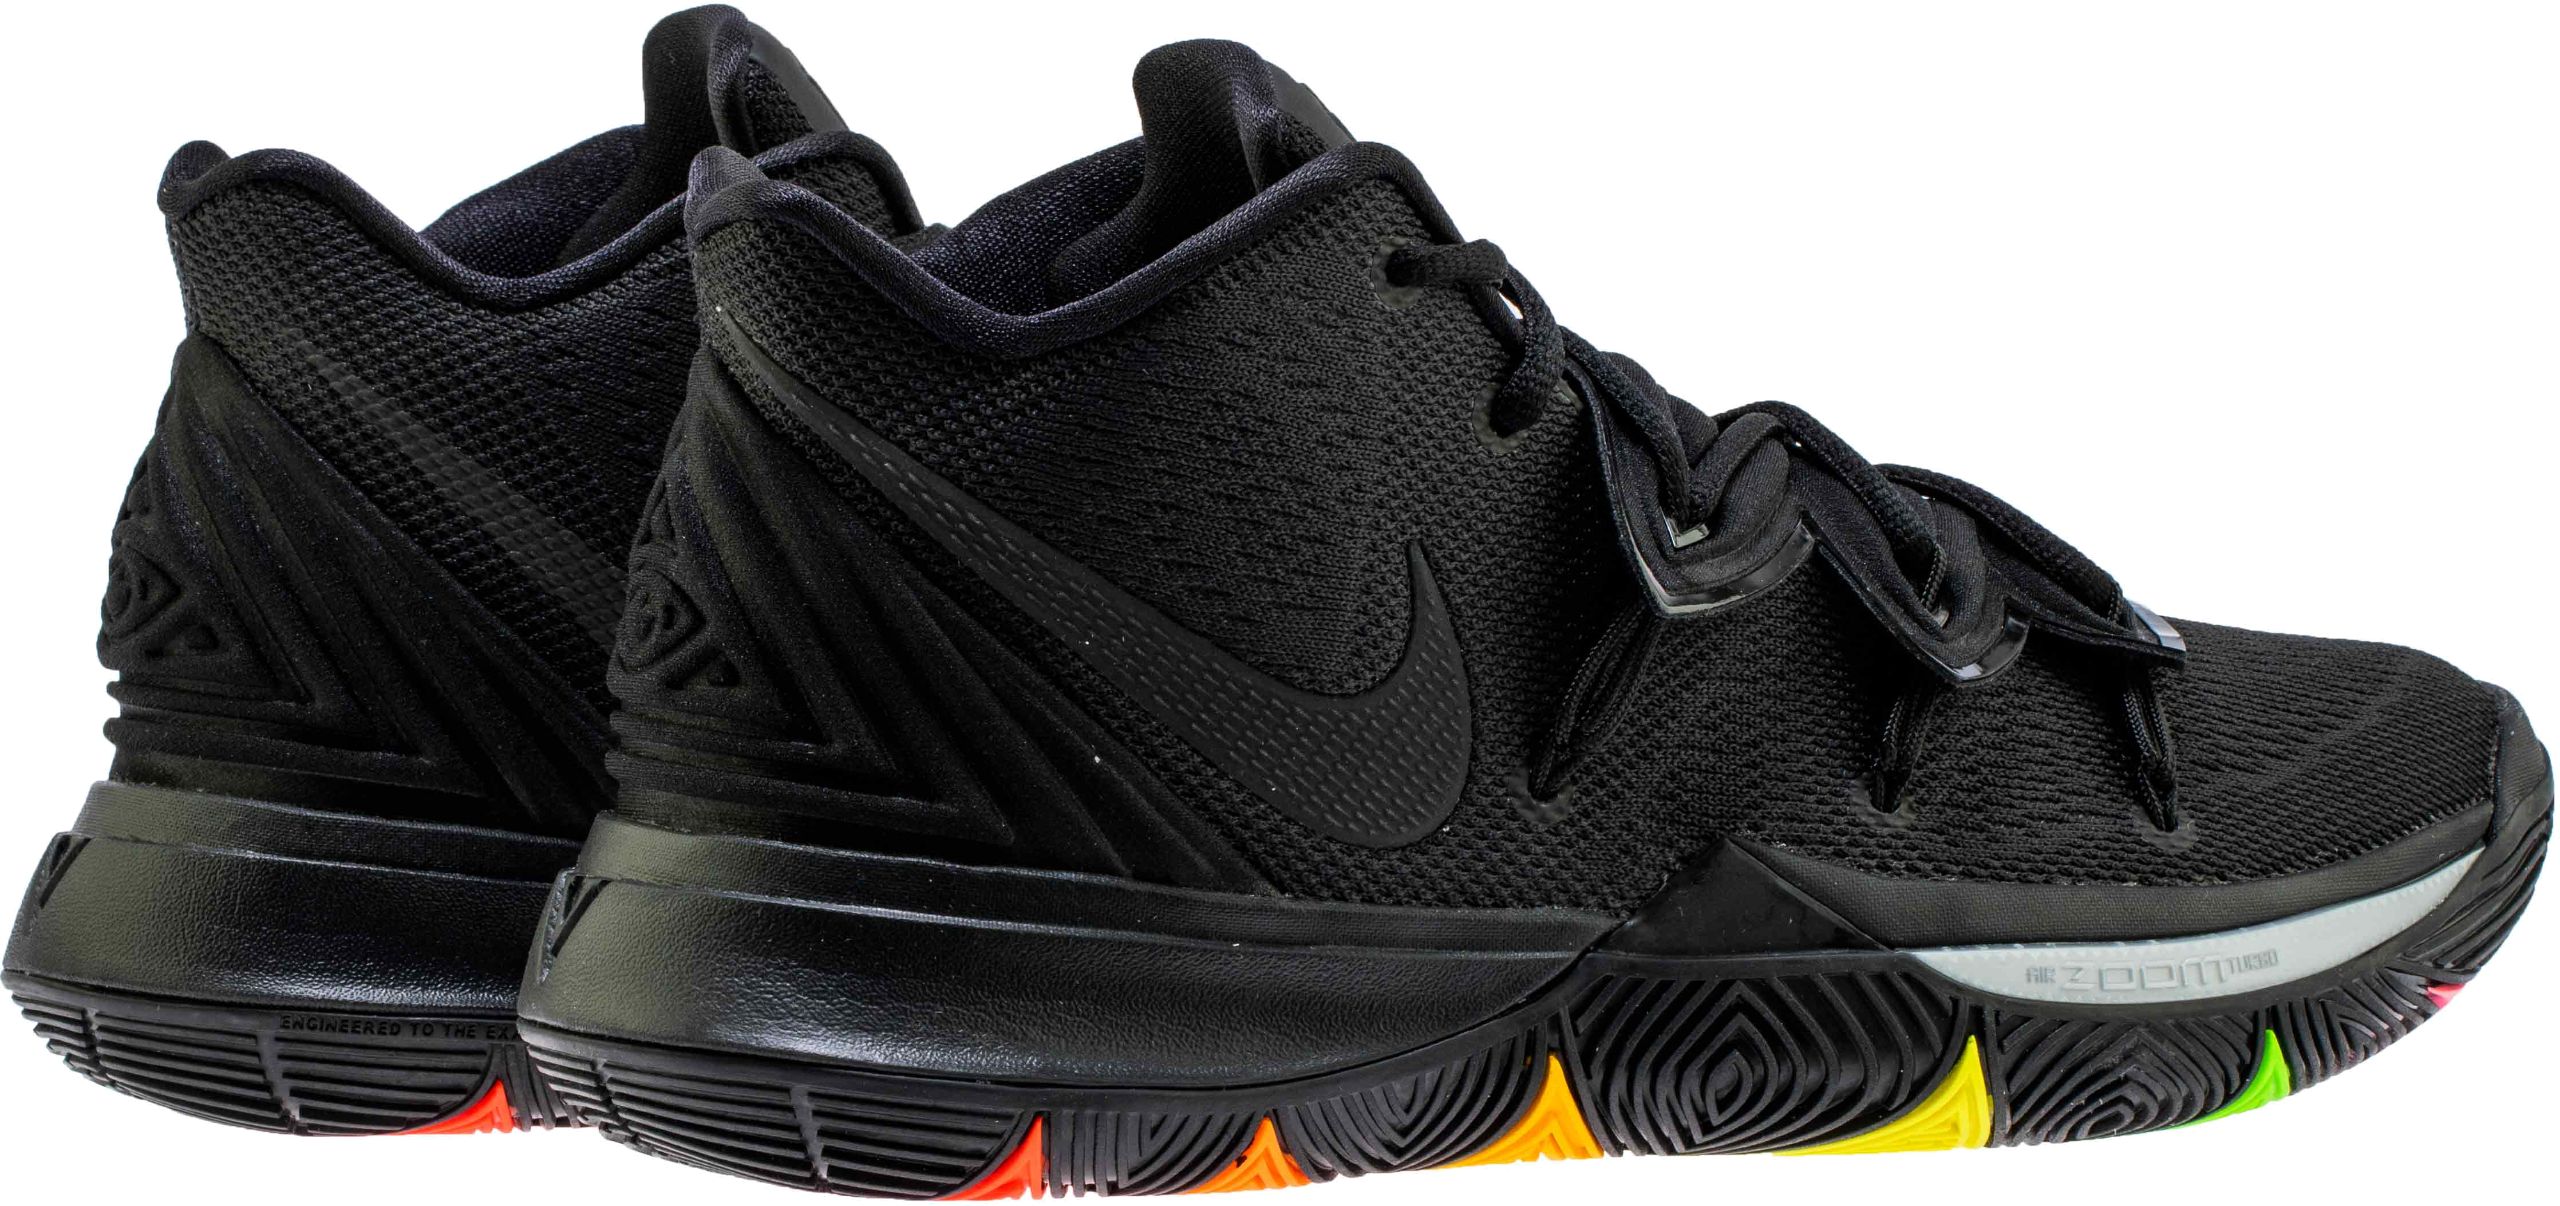 kyrie 5 basketball shoes mens